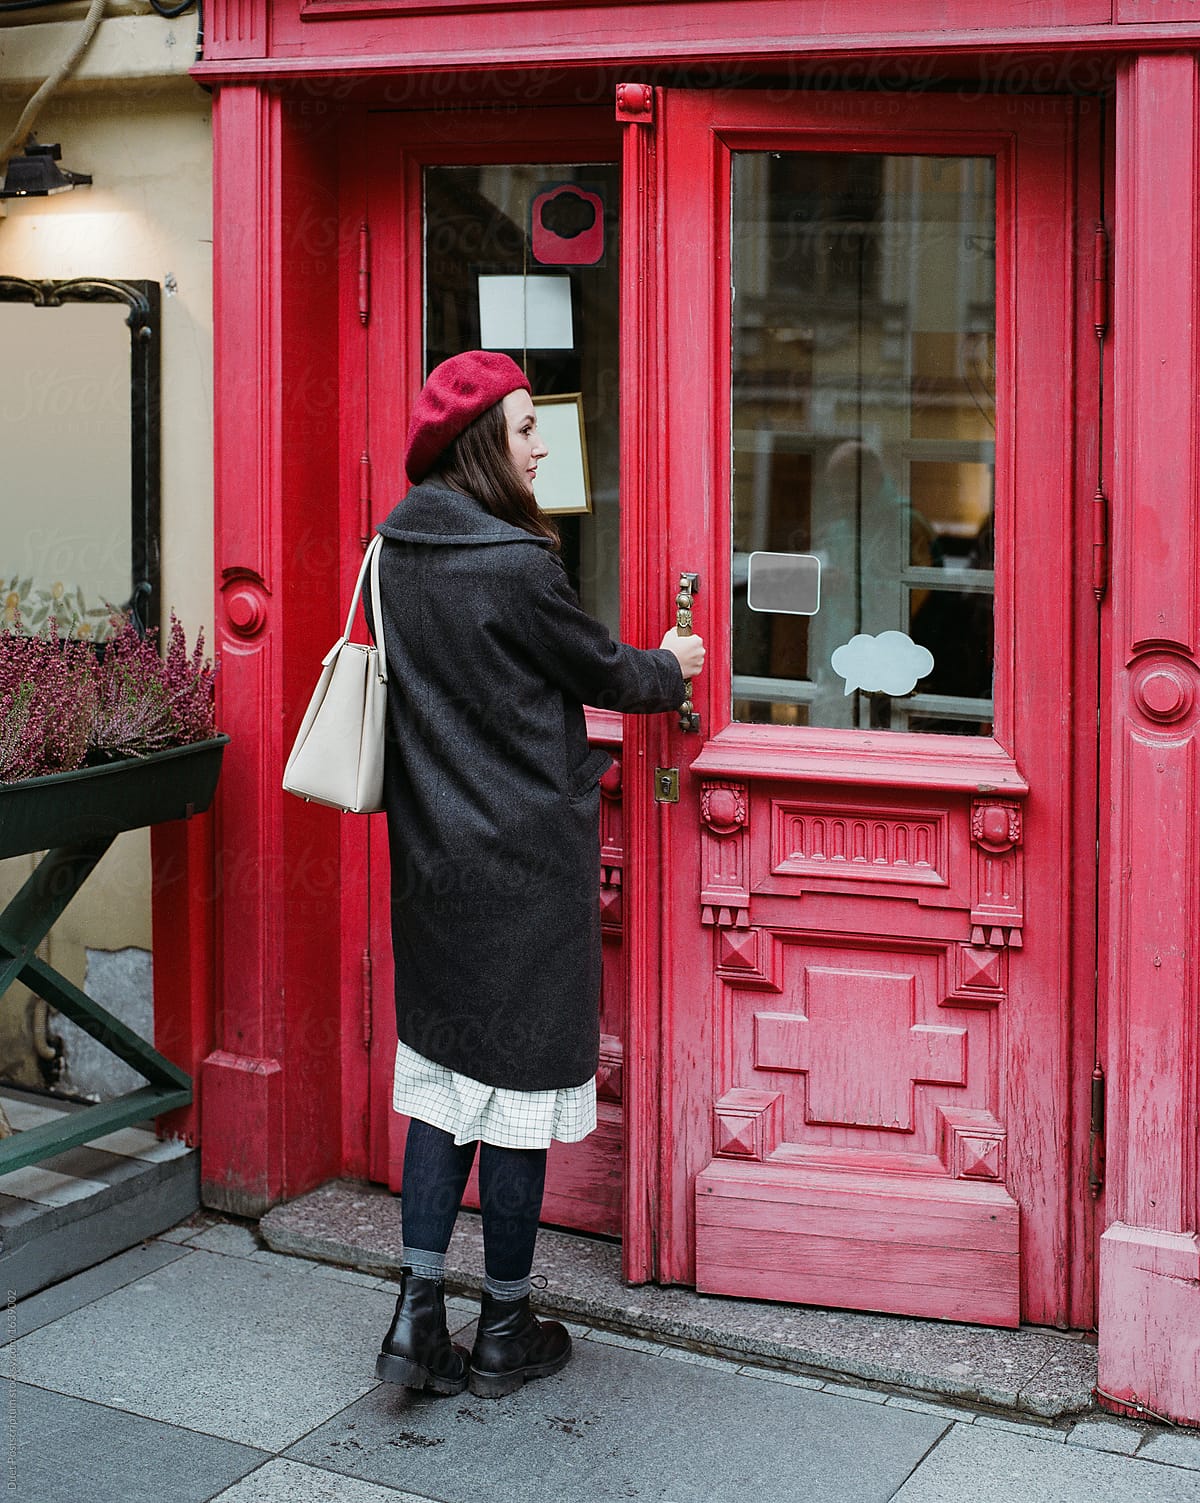 Woman entering place with red door